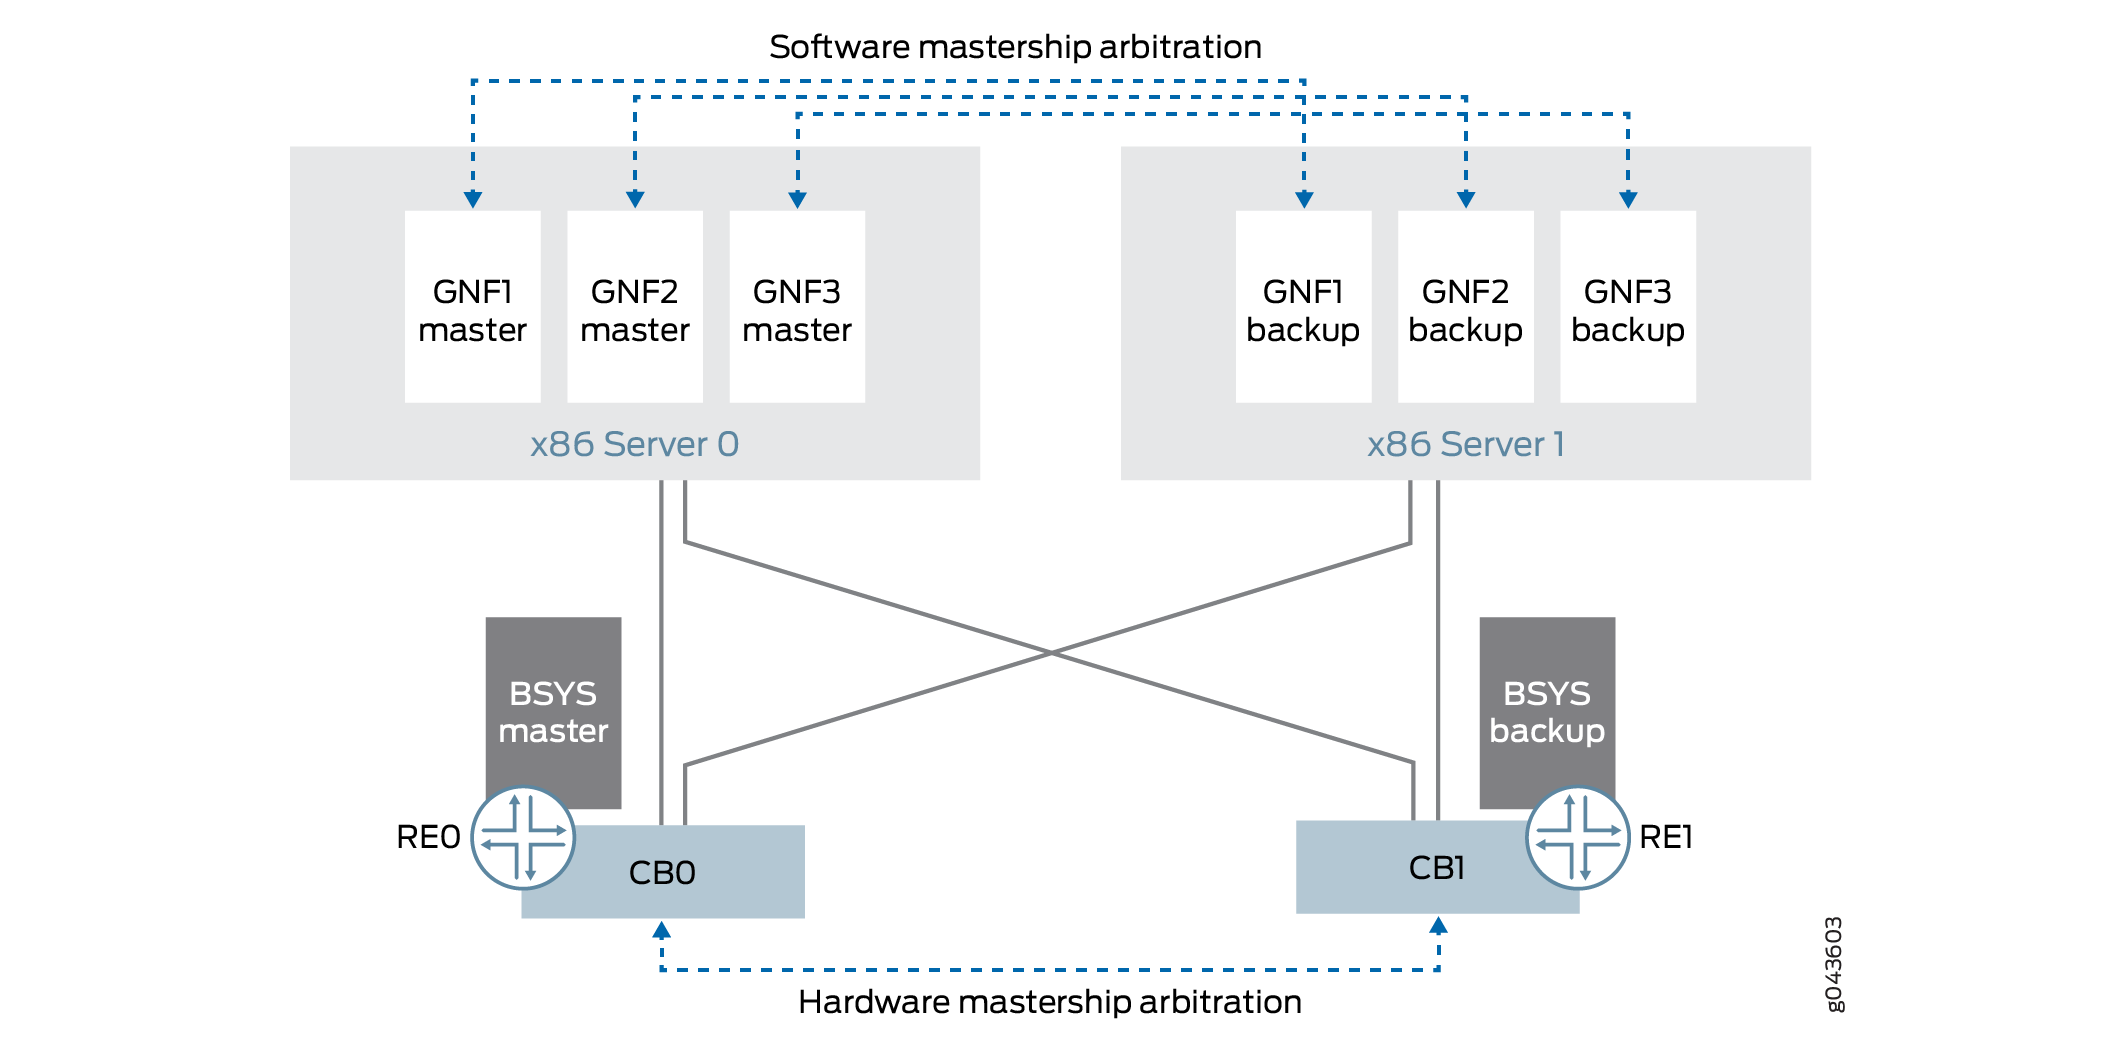 Primary-role Behavior of GNF and BSYS (External Server Model)